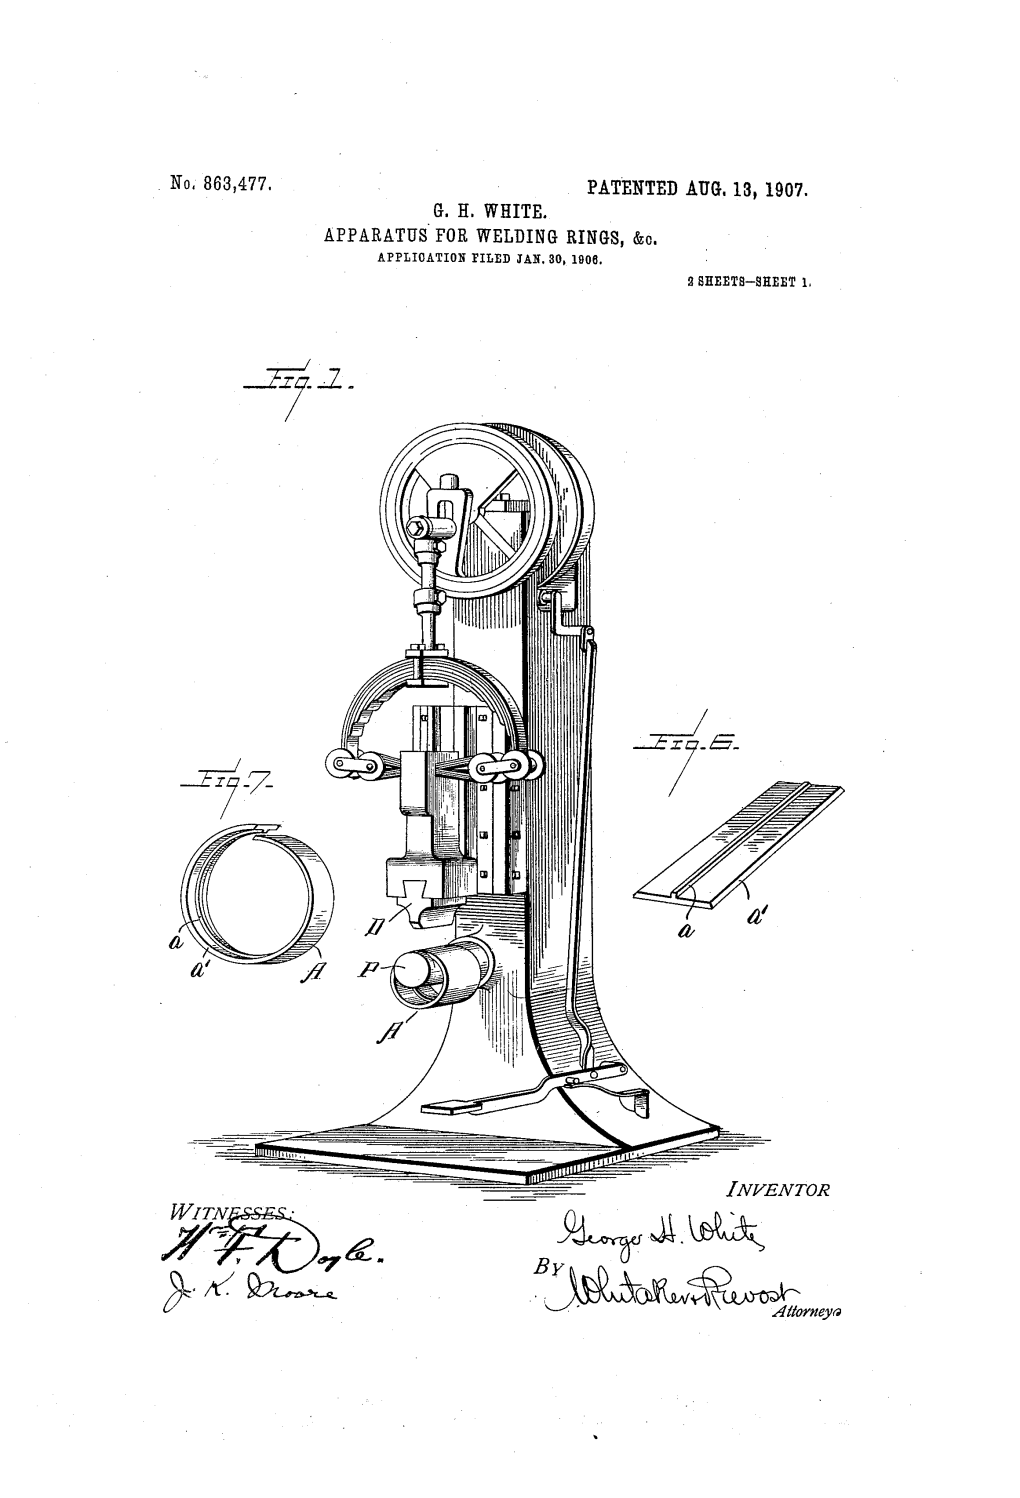 No. 863,477. PATENTED AUG, 18, 1907. G